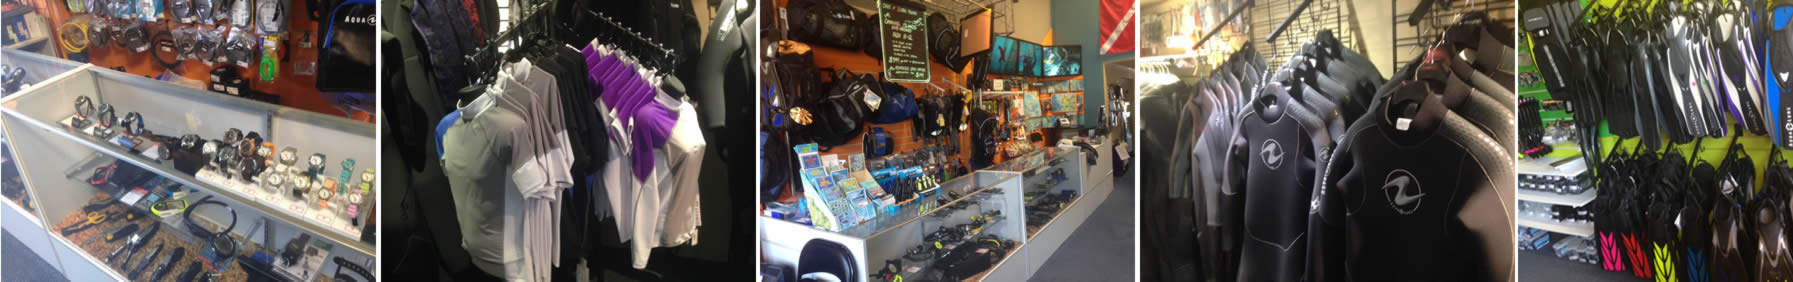 Required Scuba Gear Shop try on at the Near Me location in San Mateo Learn to Scuba Dive in the Bay Area